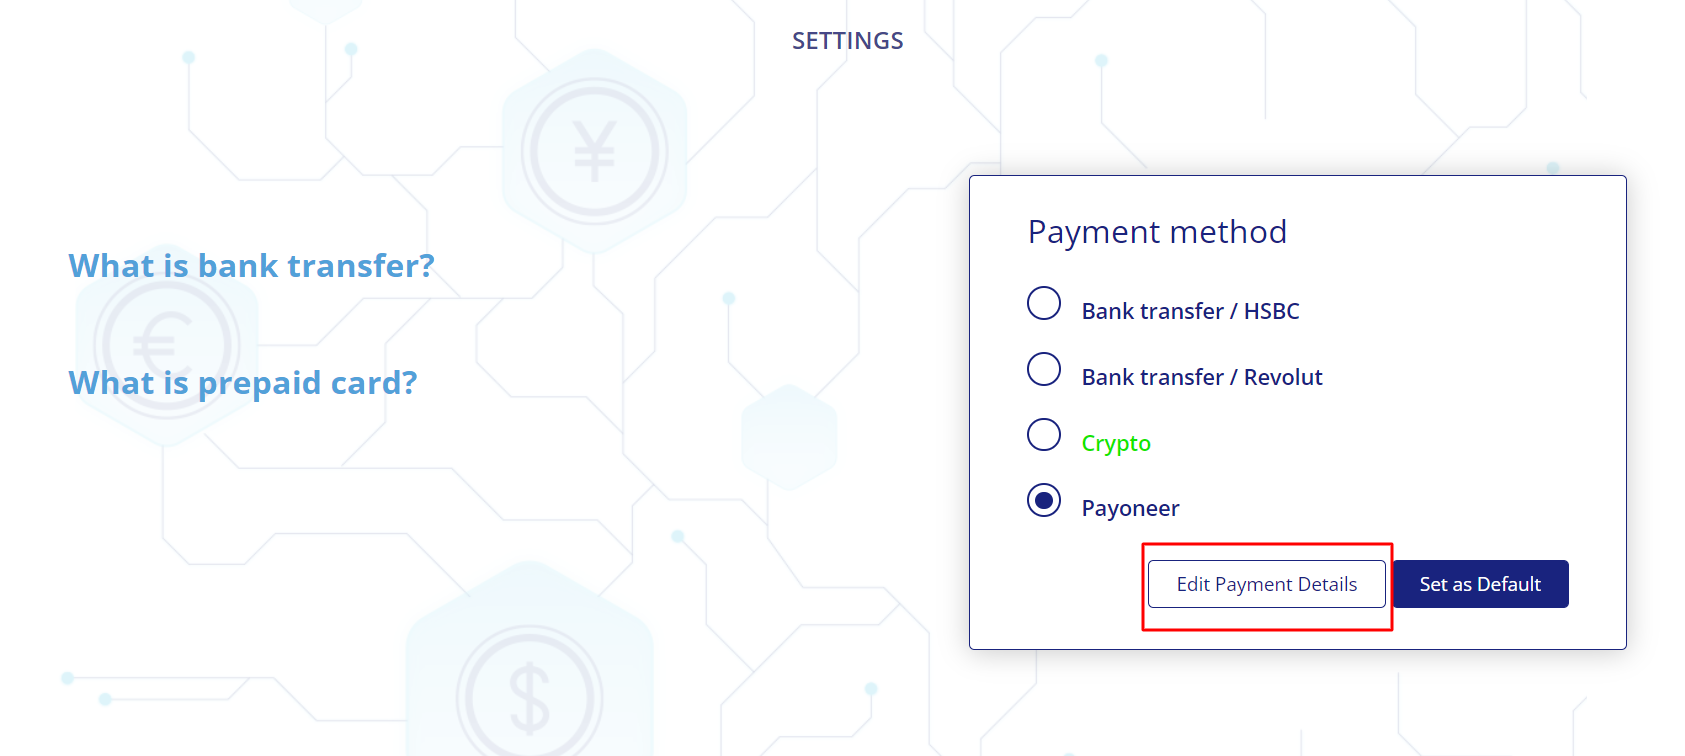 select a payment method